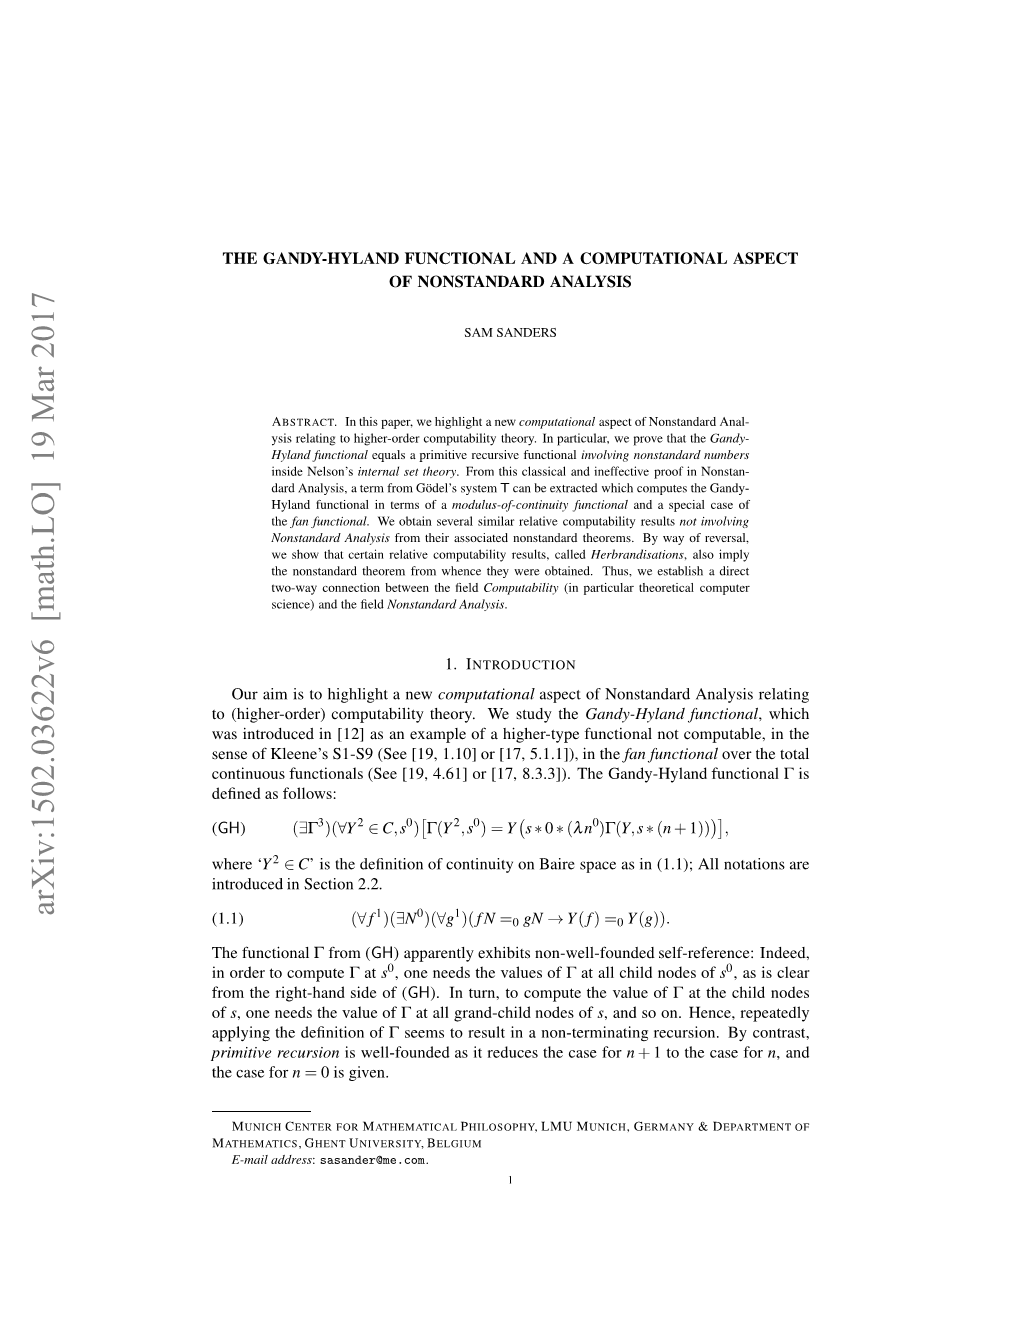 The Gandy-Hyland Functional and a Hitherto Unknown Computational